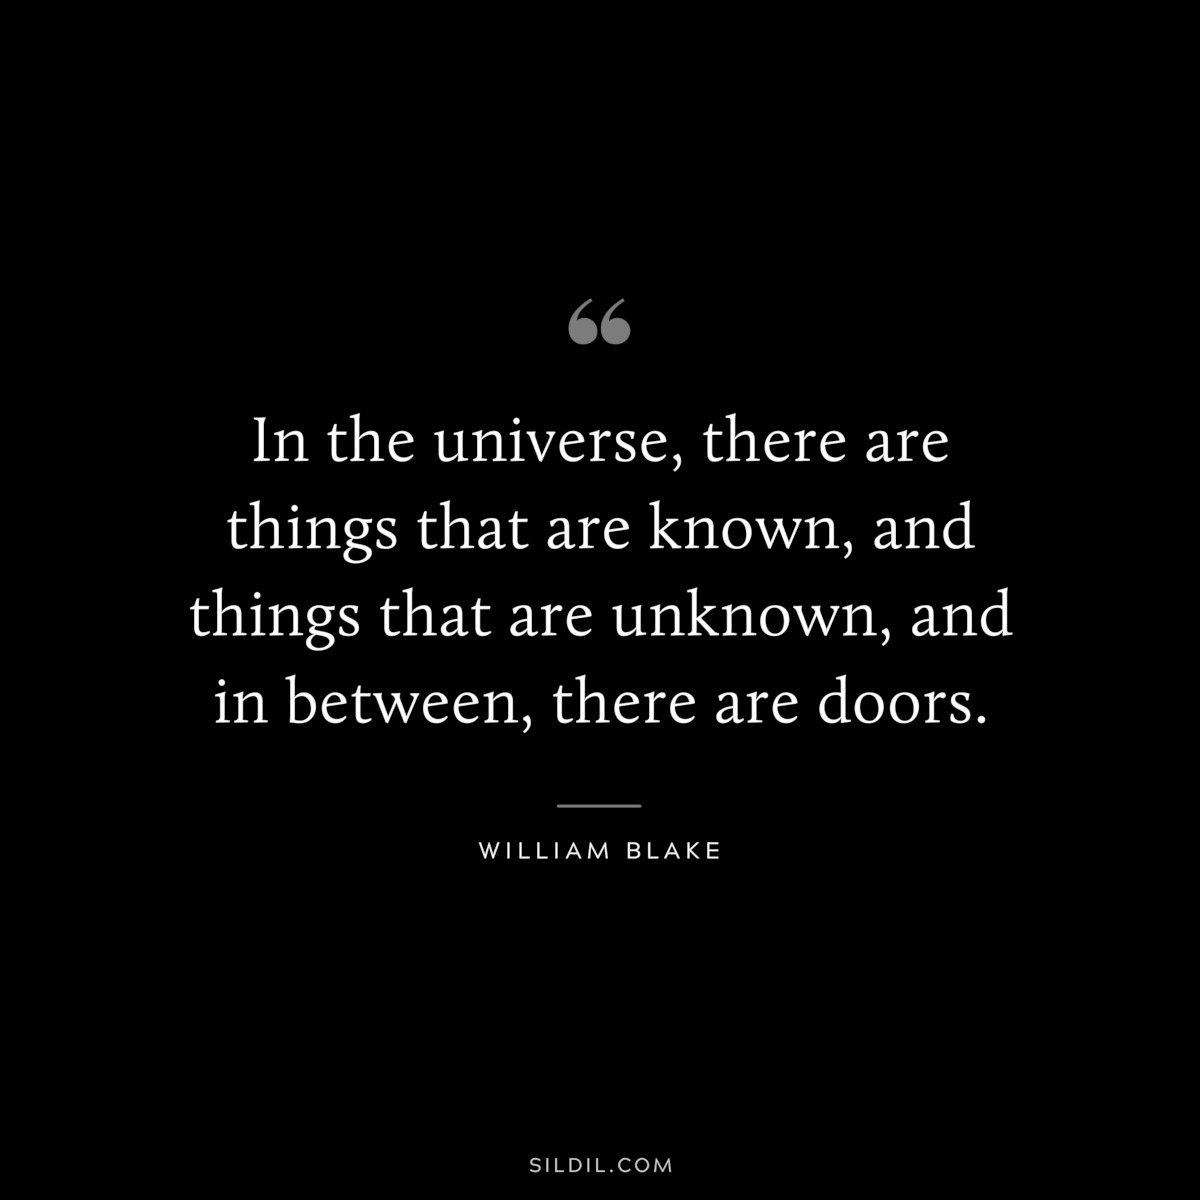 In the universe, there are things that are known, and things that are unknown, and in between, there are doors. ― William Blake